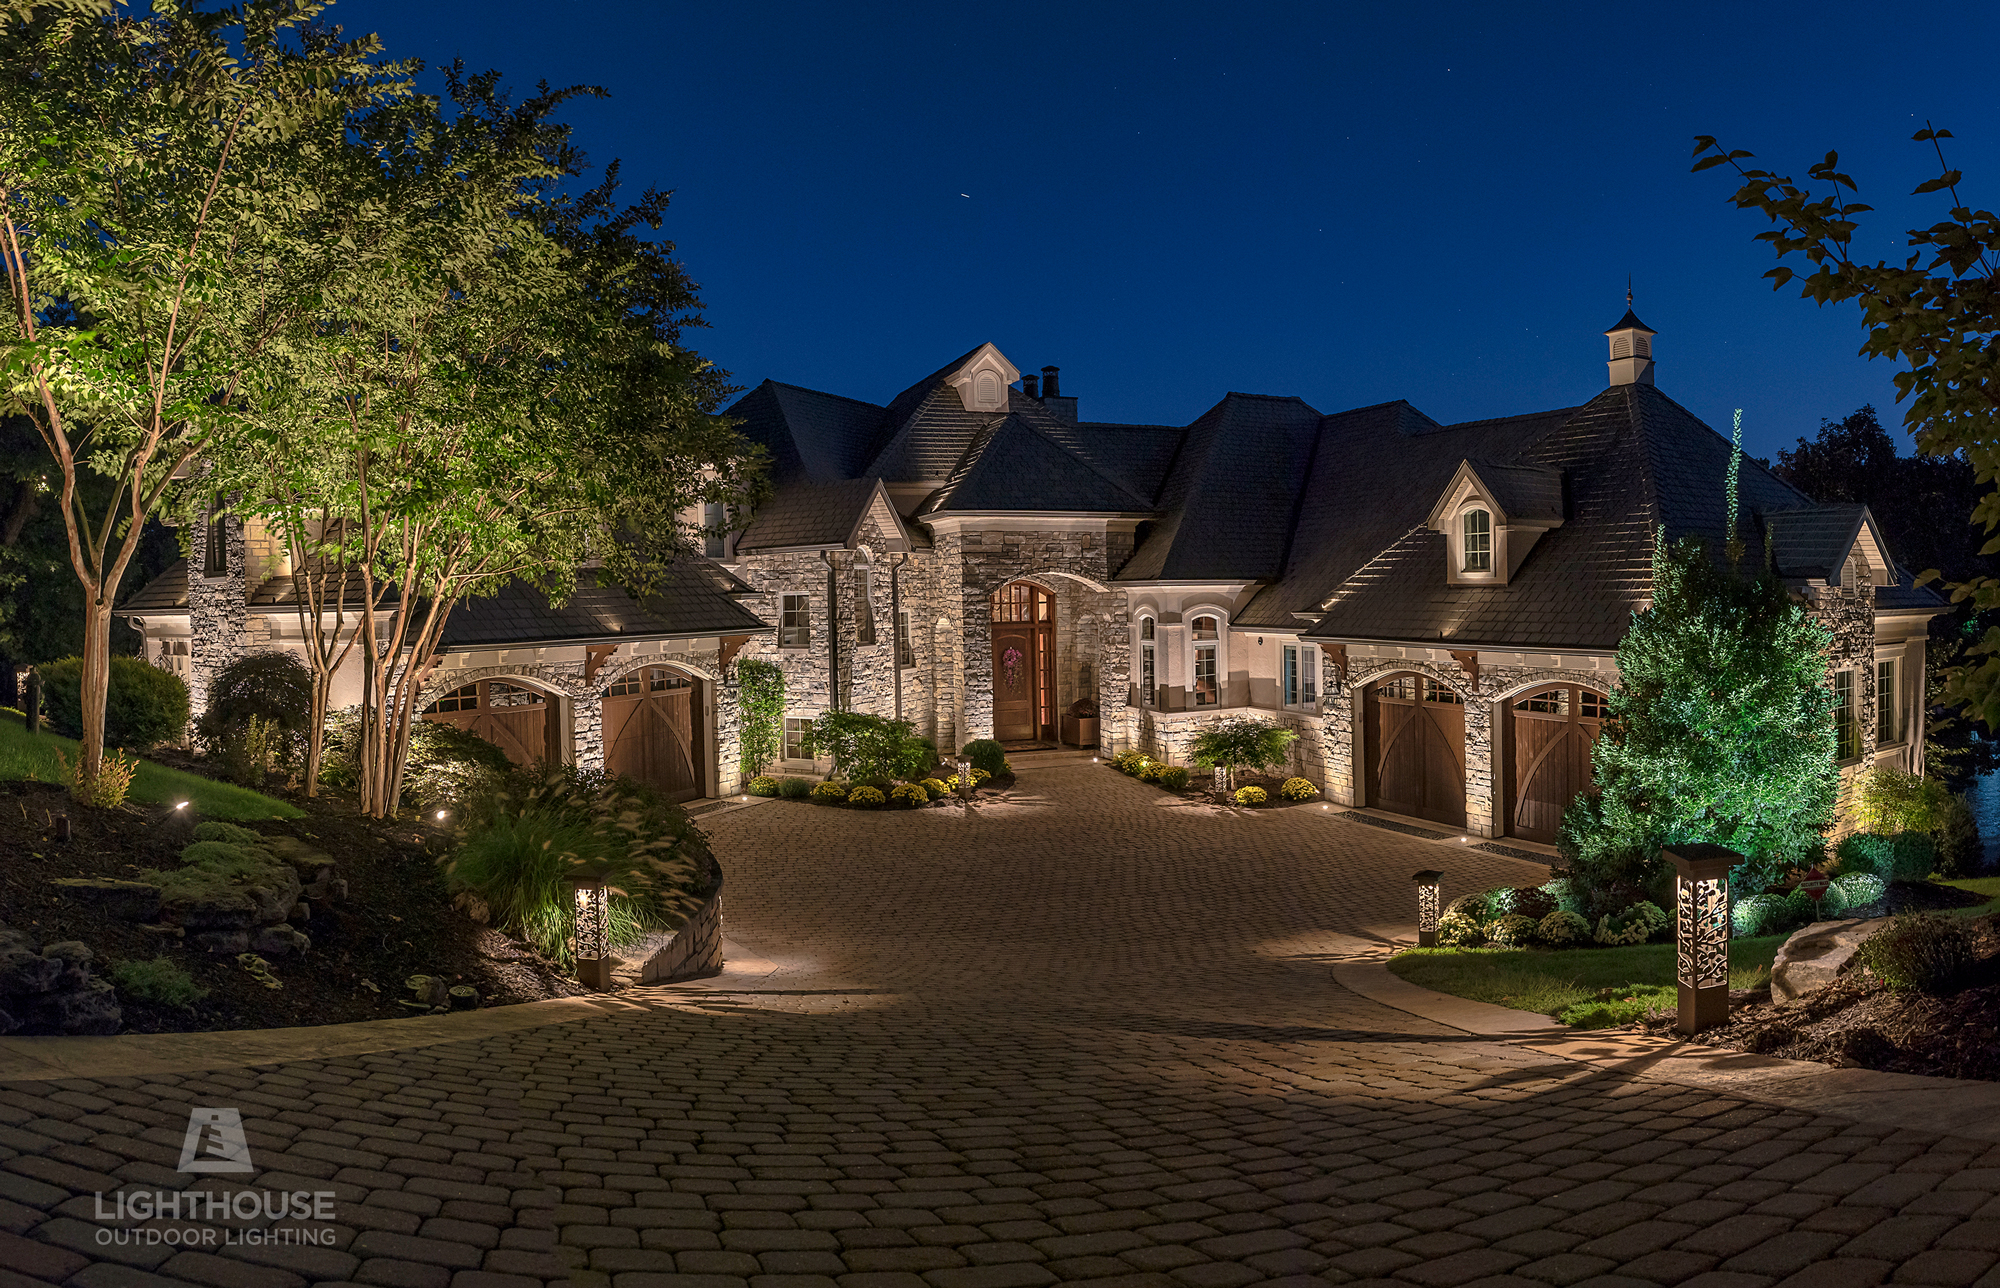 Driveway lighting in Channelview, TX